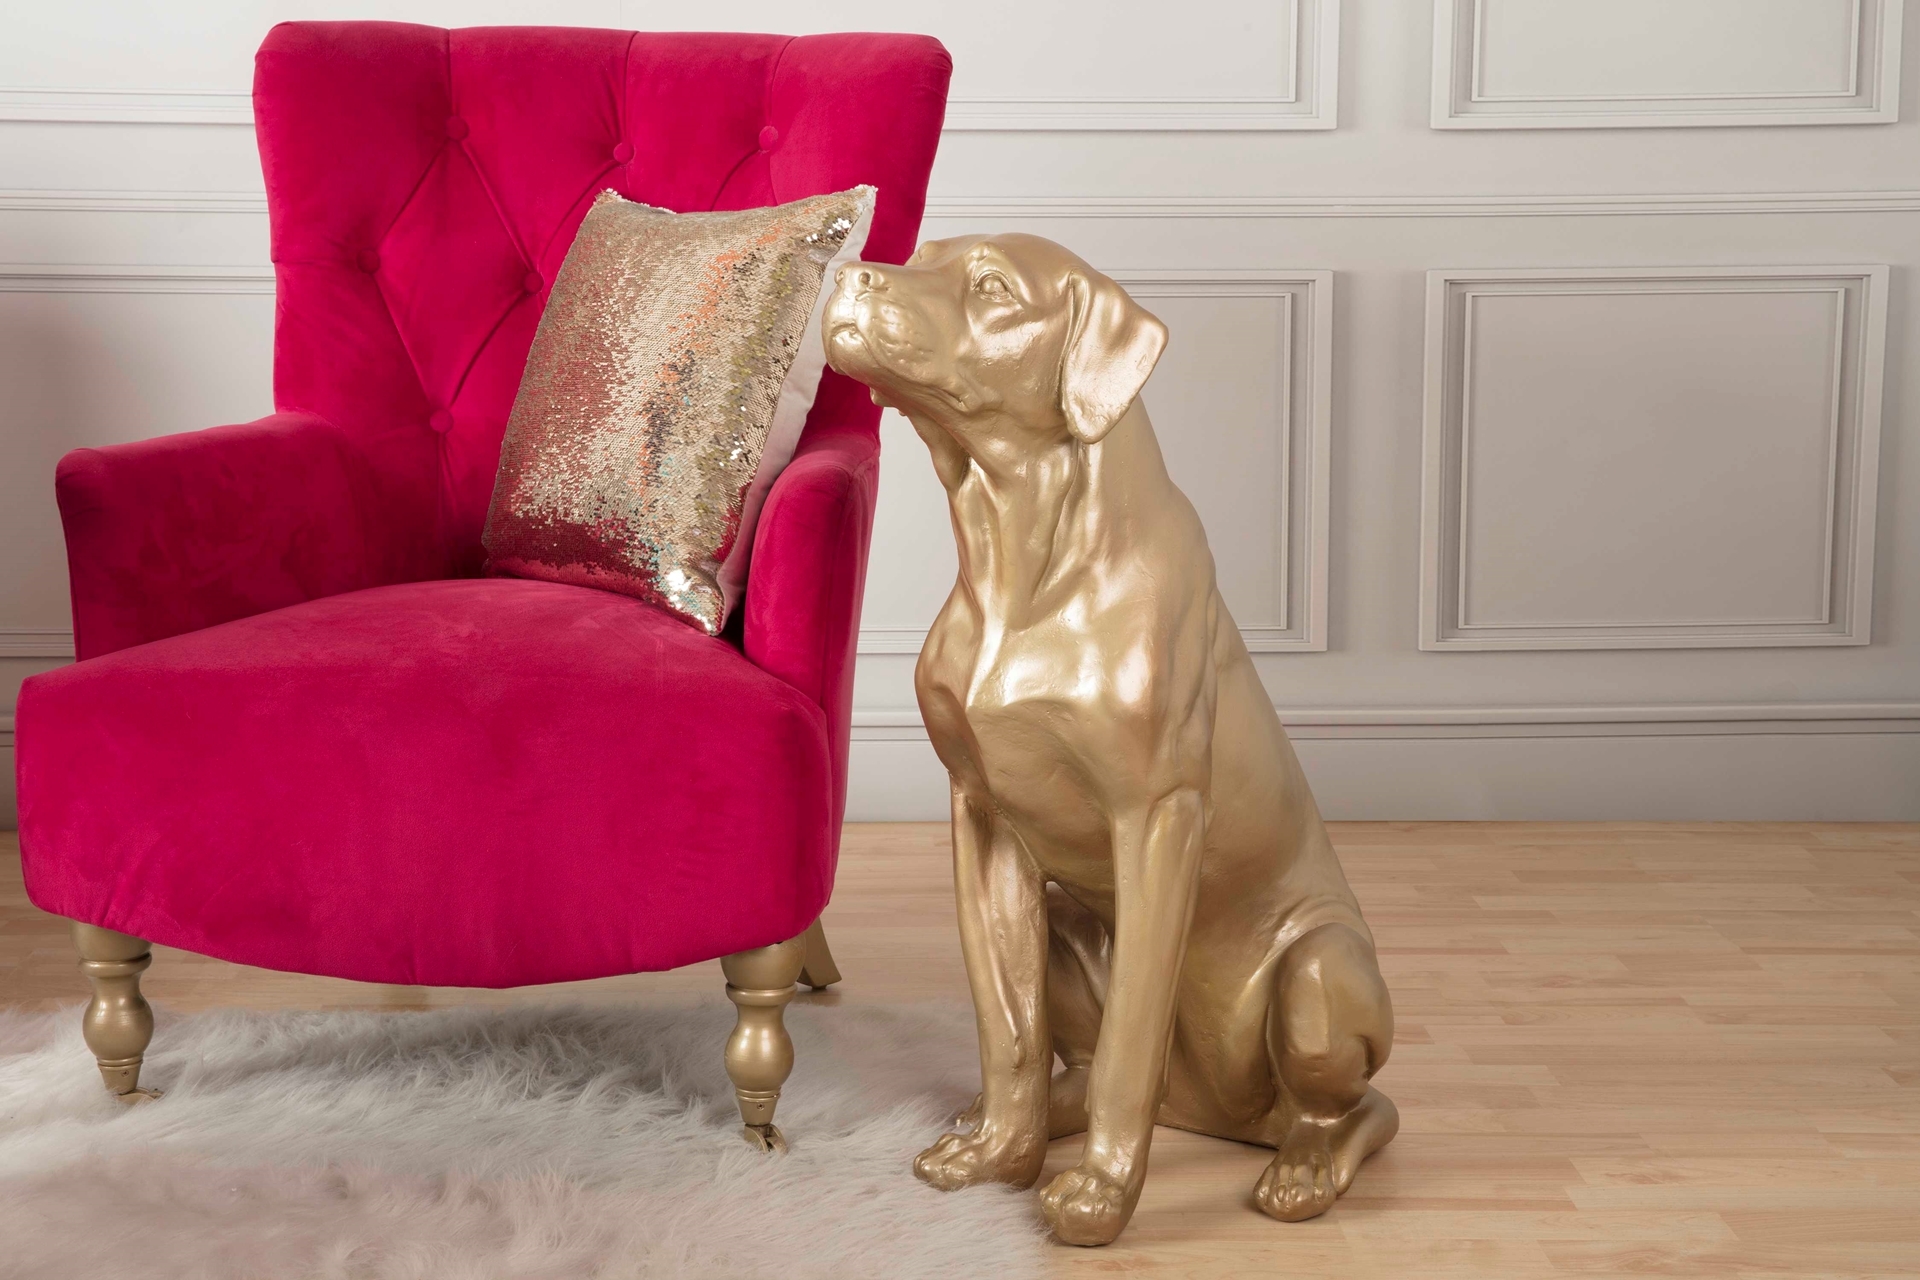 Gold Dog Statue with Metallic Spray Paint